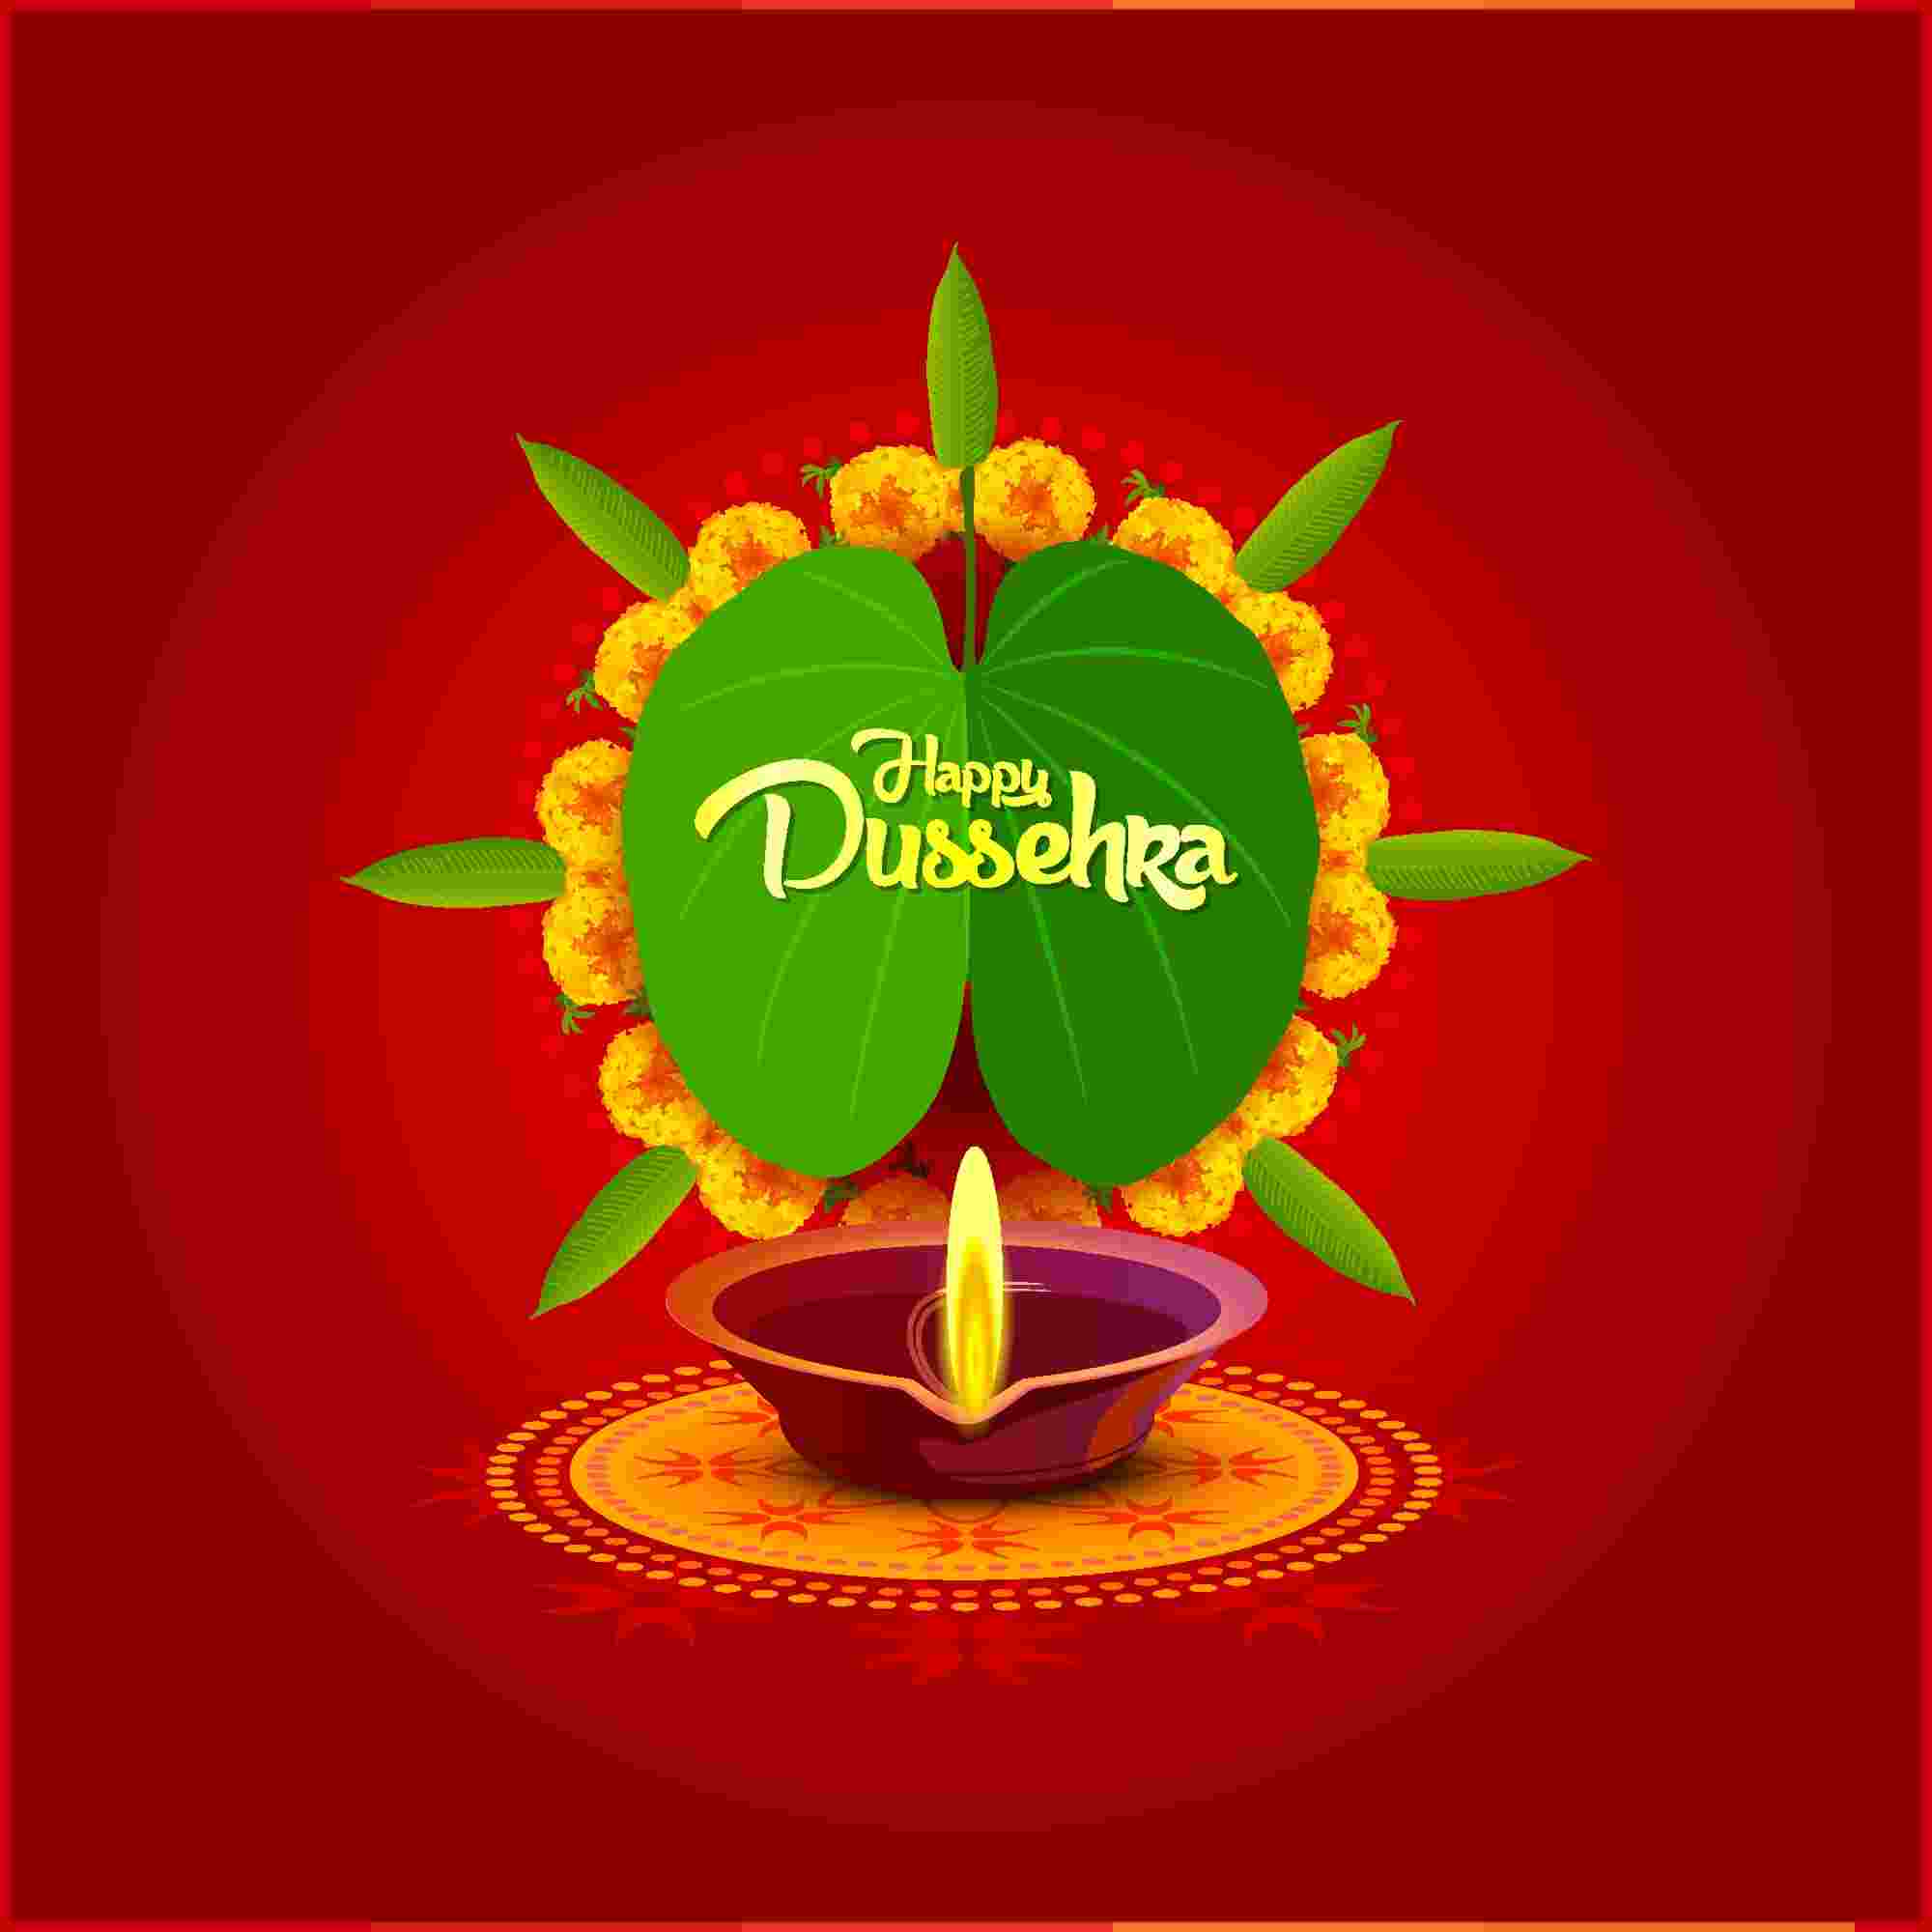 dussehra wishes images free download
